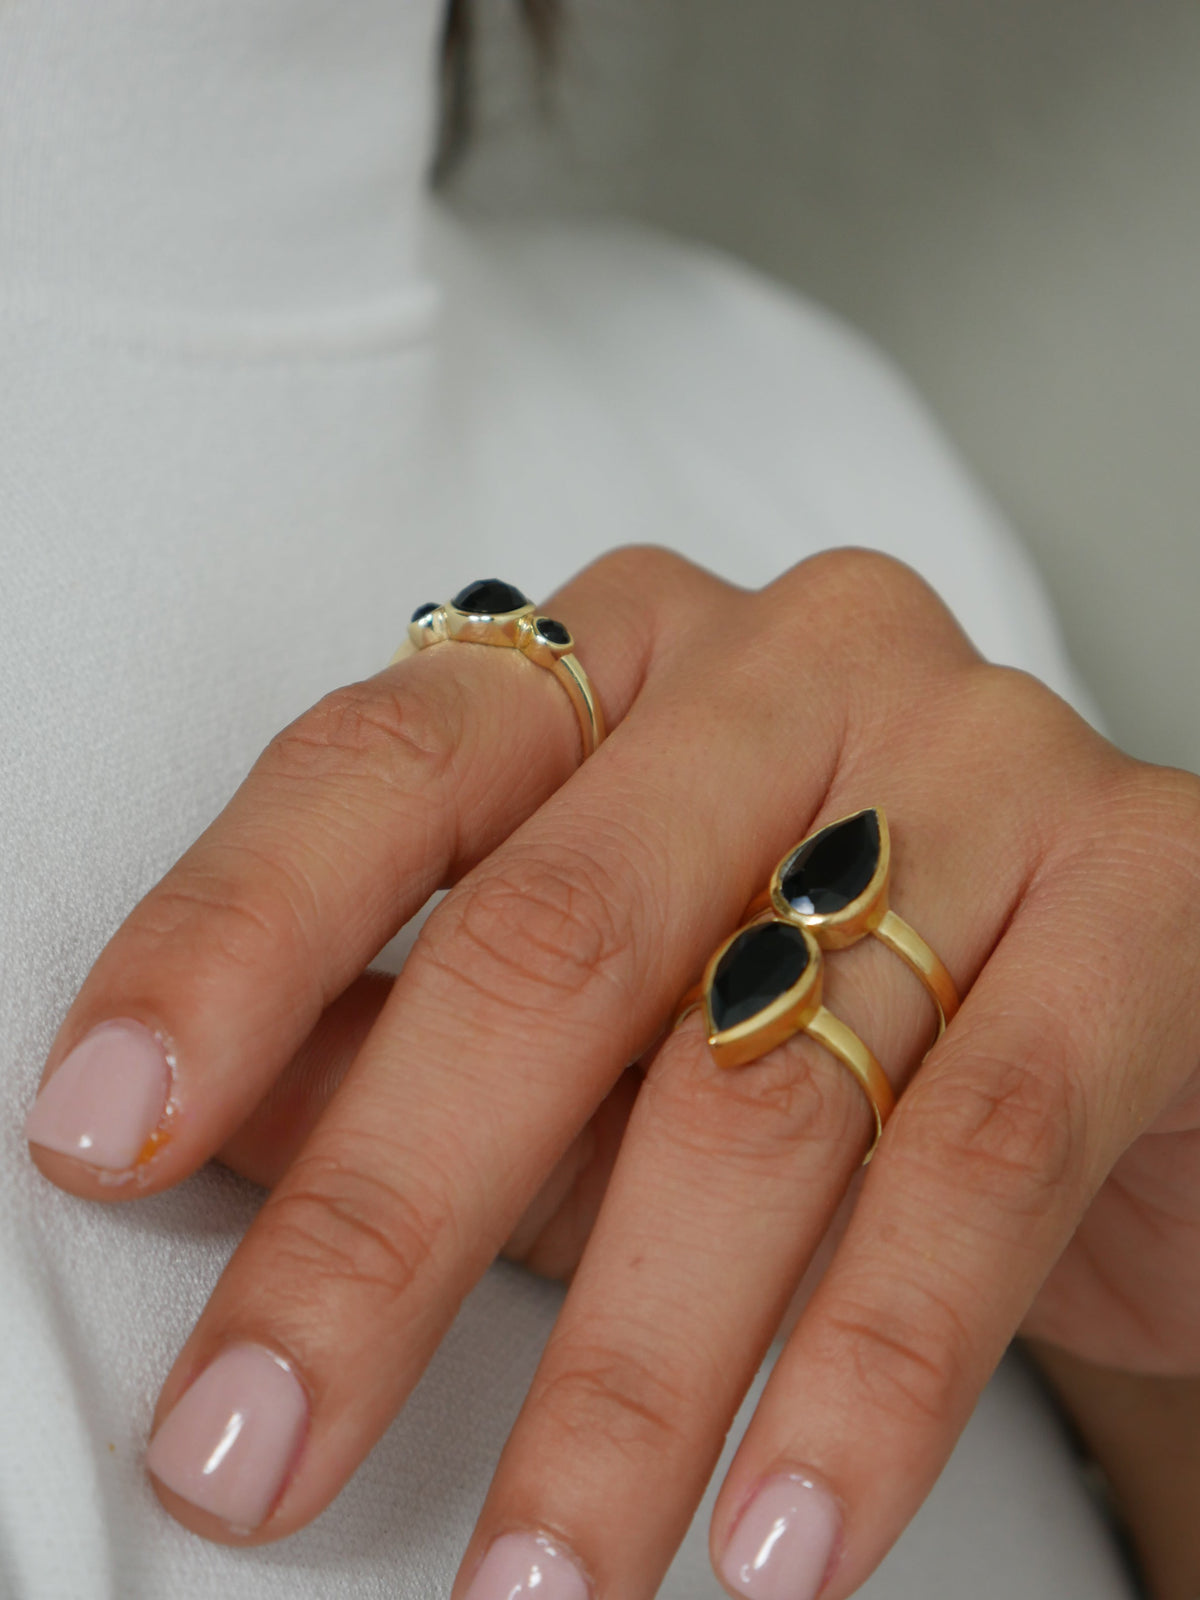 rings, gold rings, gold plated rings, gold onyx rings, Black onyx ring, 14k gold plated, sterling silver .925 waterproof rings, statement designer luxury rings, , birthday gifts, birthstone rings, black jewelry, gold and black rings, rhinestone ring, big rings, trending on instagram and tiktok unique rings, popular rings, real gemstone rings, real black crystals, what is onyx, properties of onyx, jewelry. Kesley Boutique, onyx accessories, fashion jewelry, onxy statement rings, designer jewelry